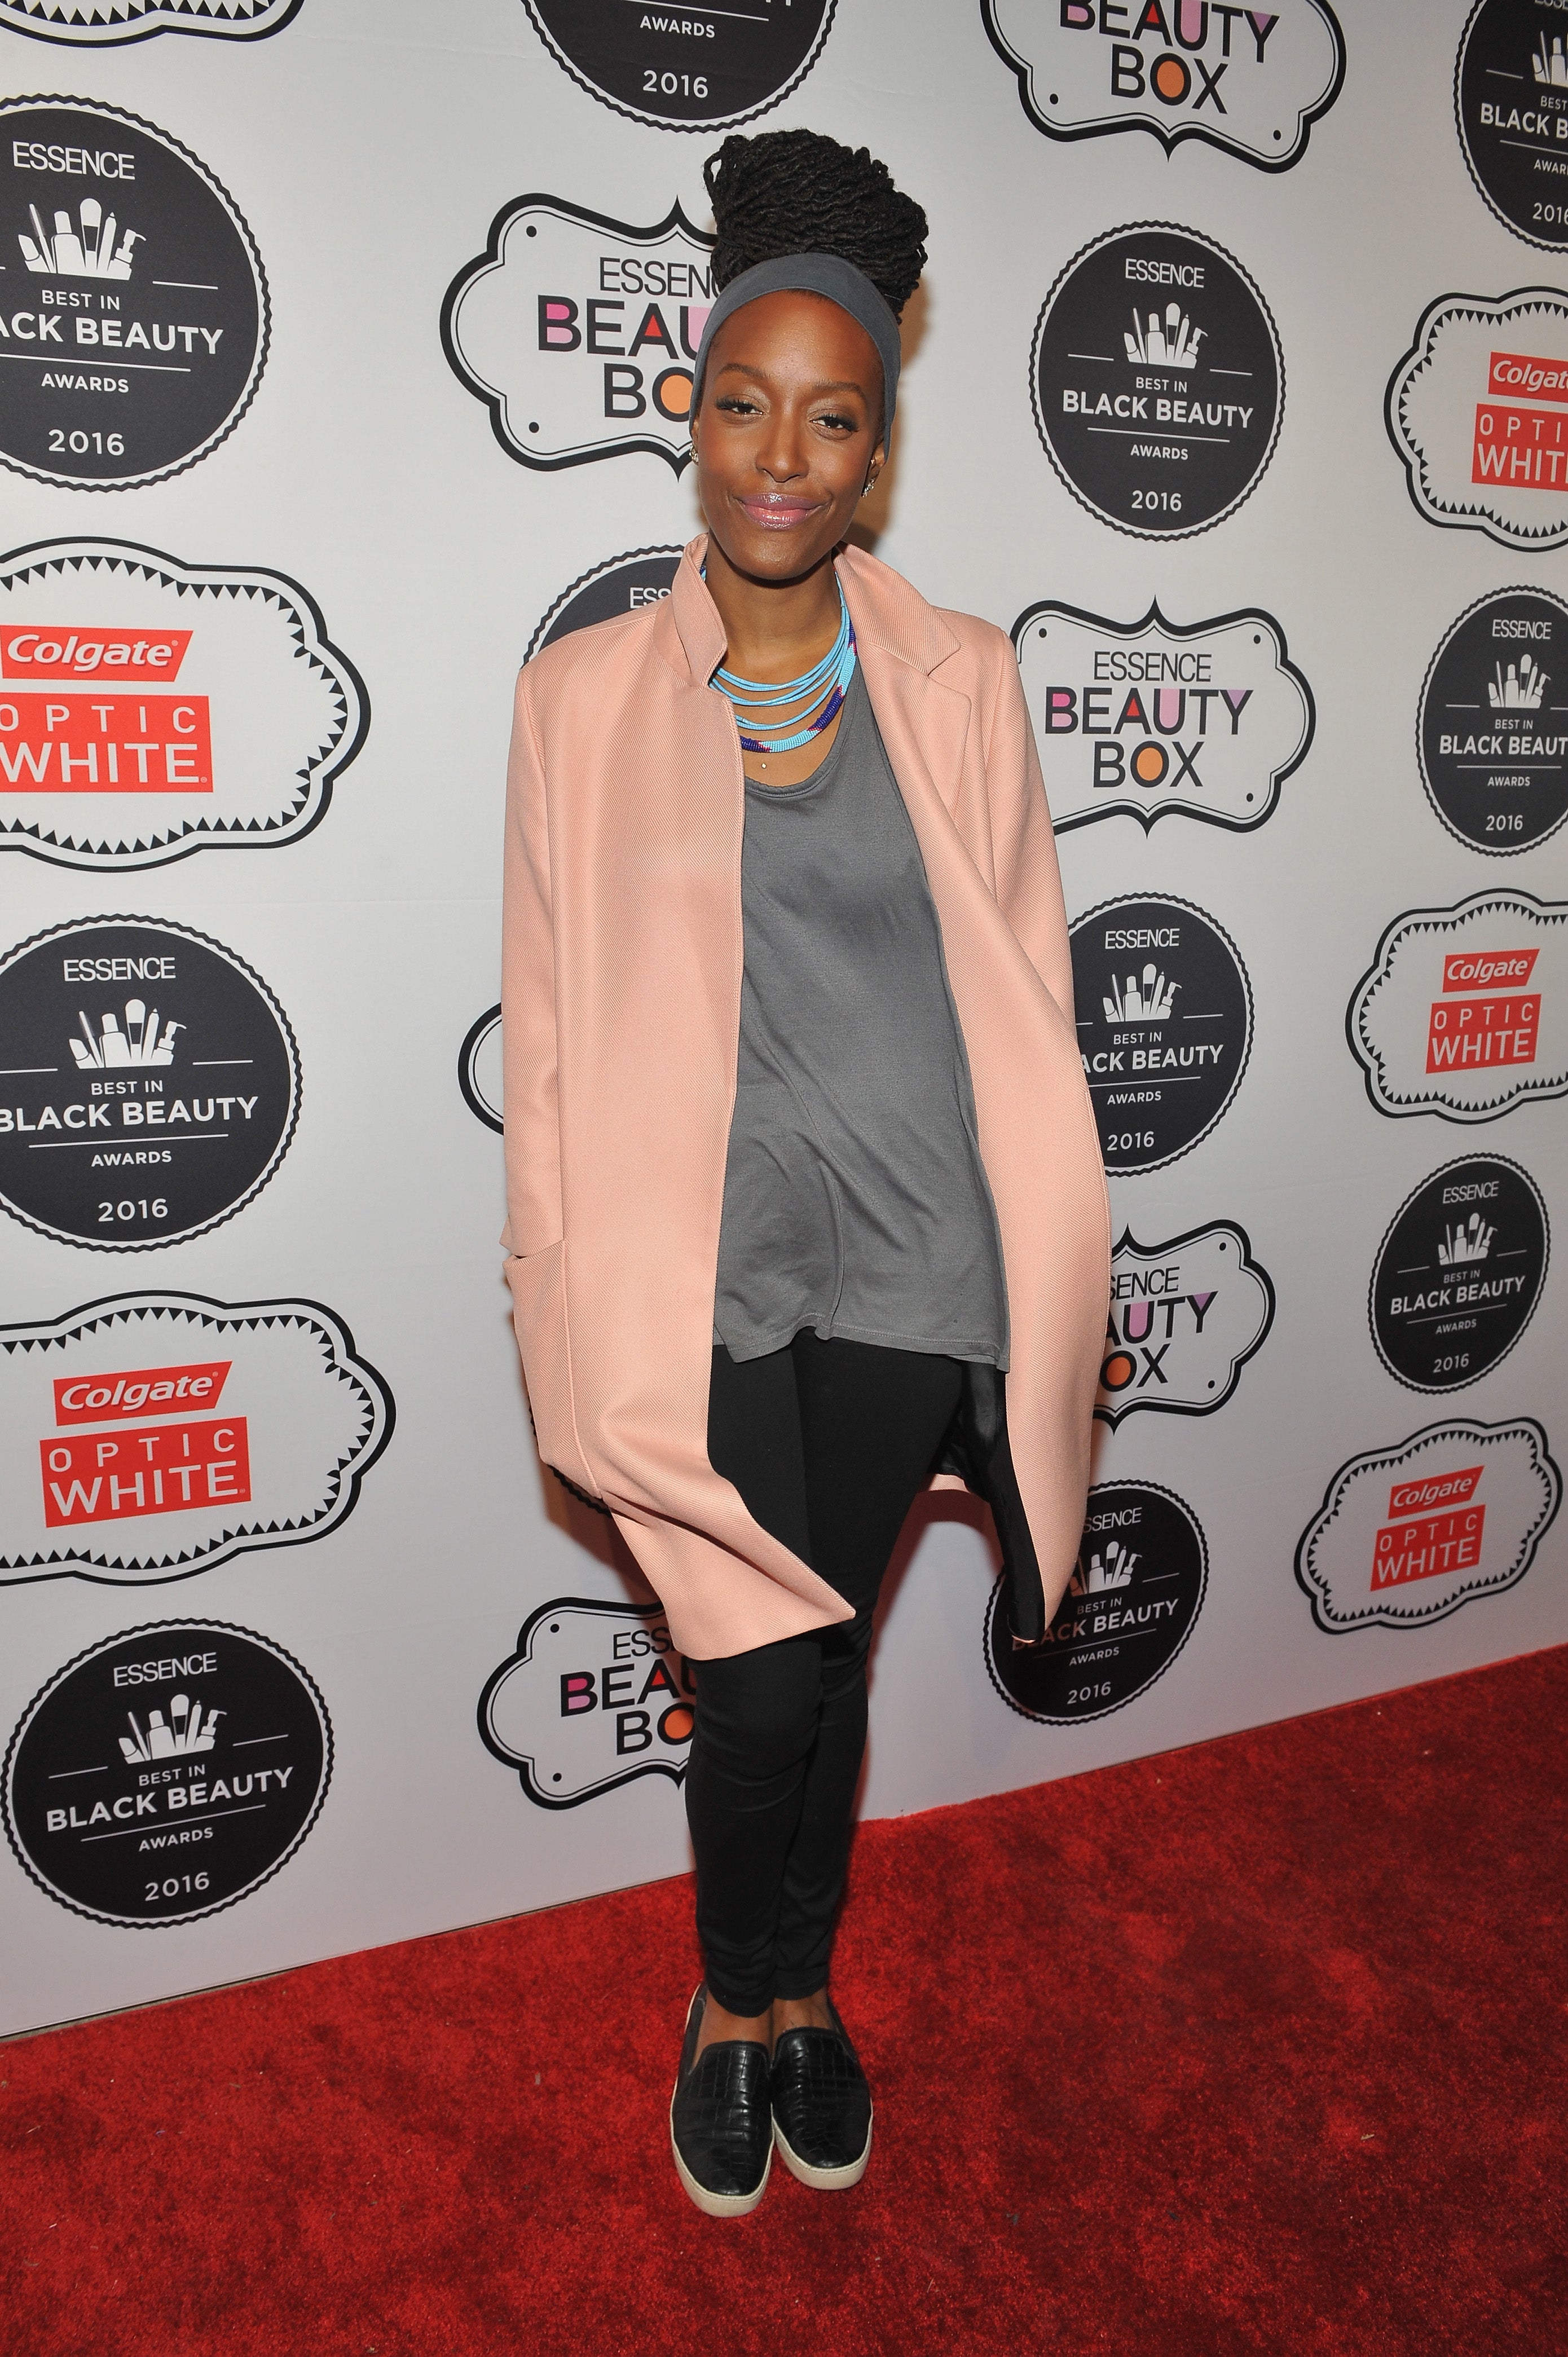 Franchesca Ramsey: ‘We Really Need to Talk About How Black Women are Portrayed in Pop Culture’
